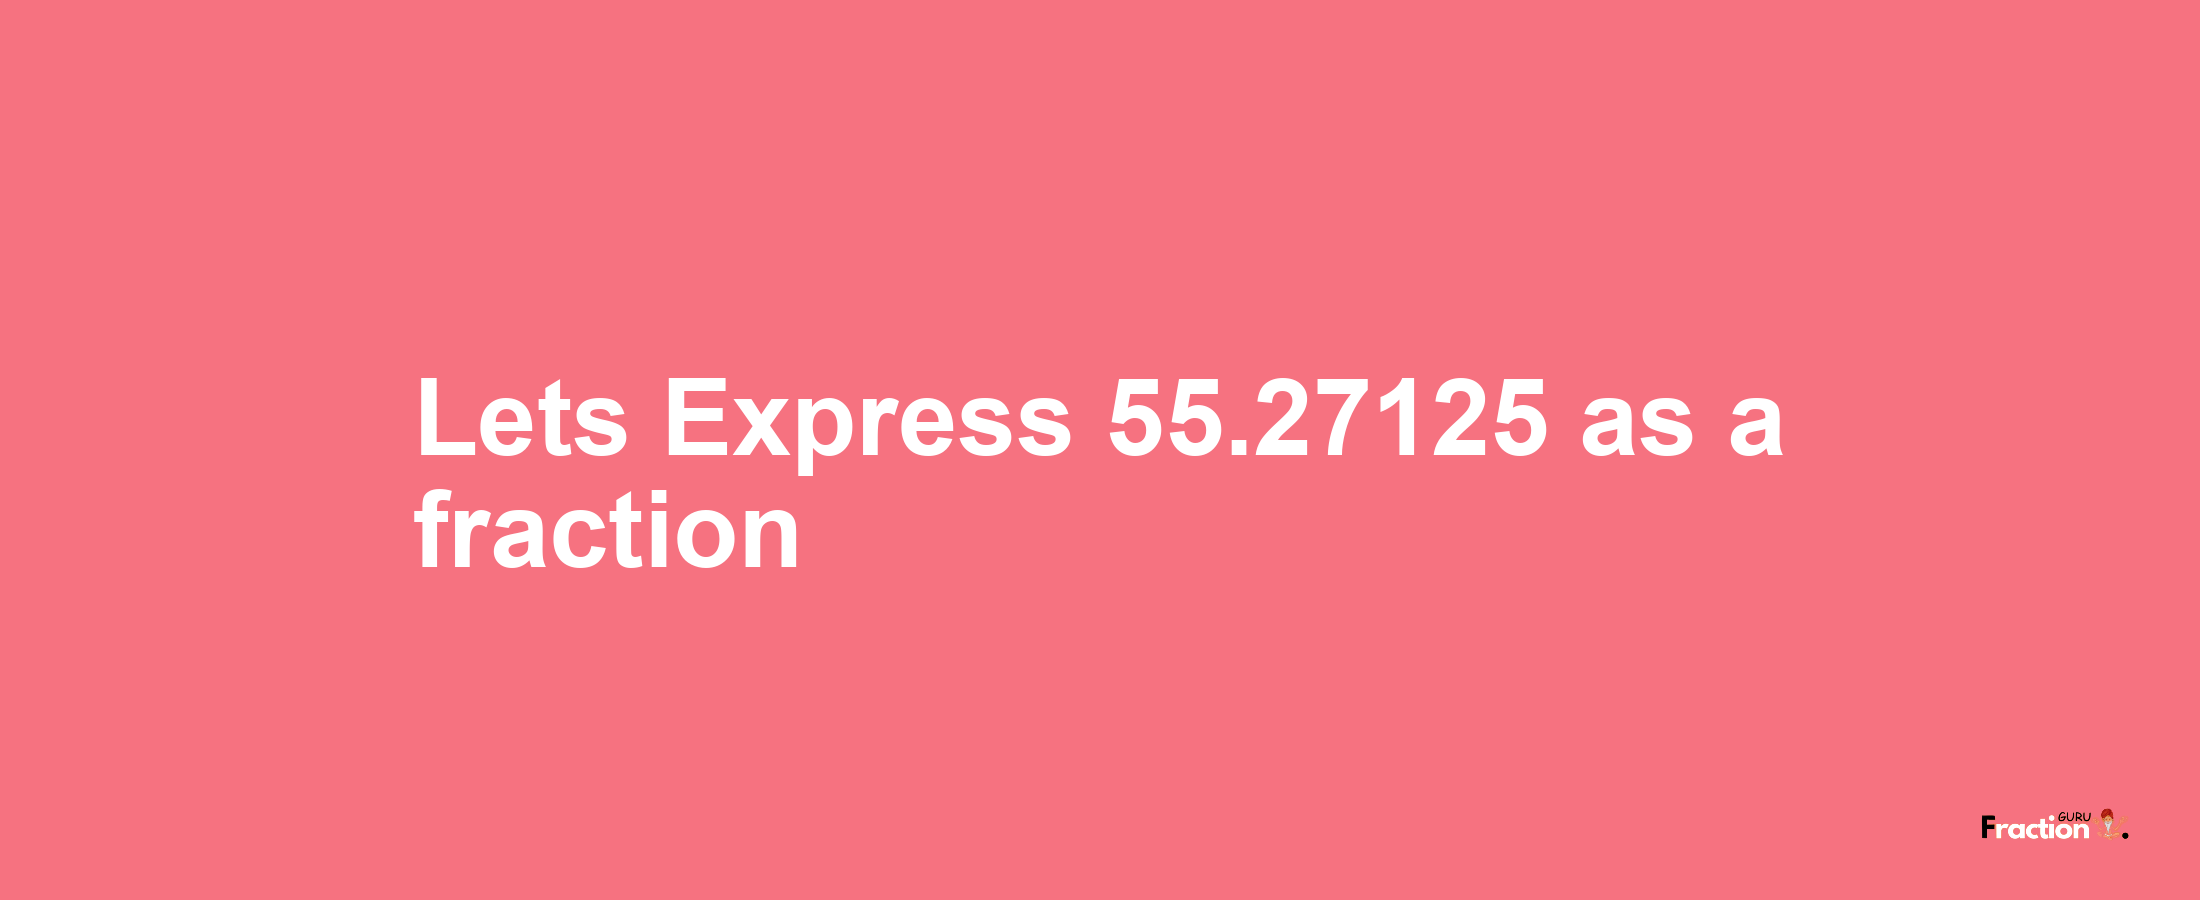 Lets Express 55.27125 as afraction